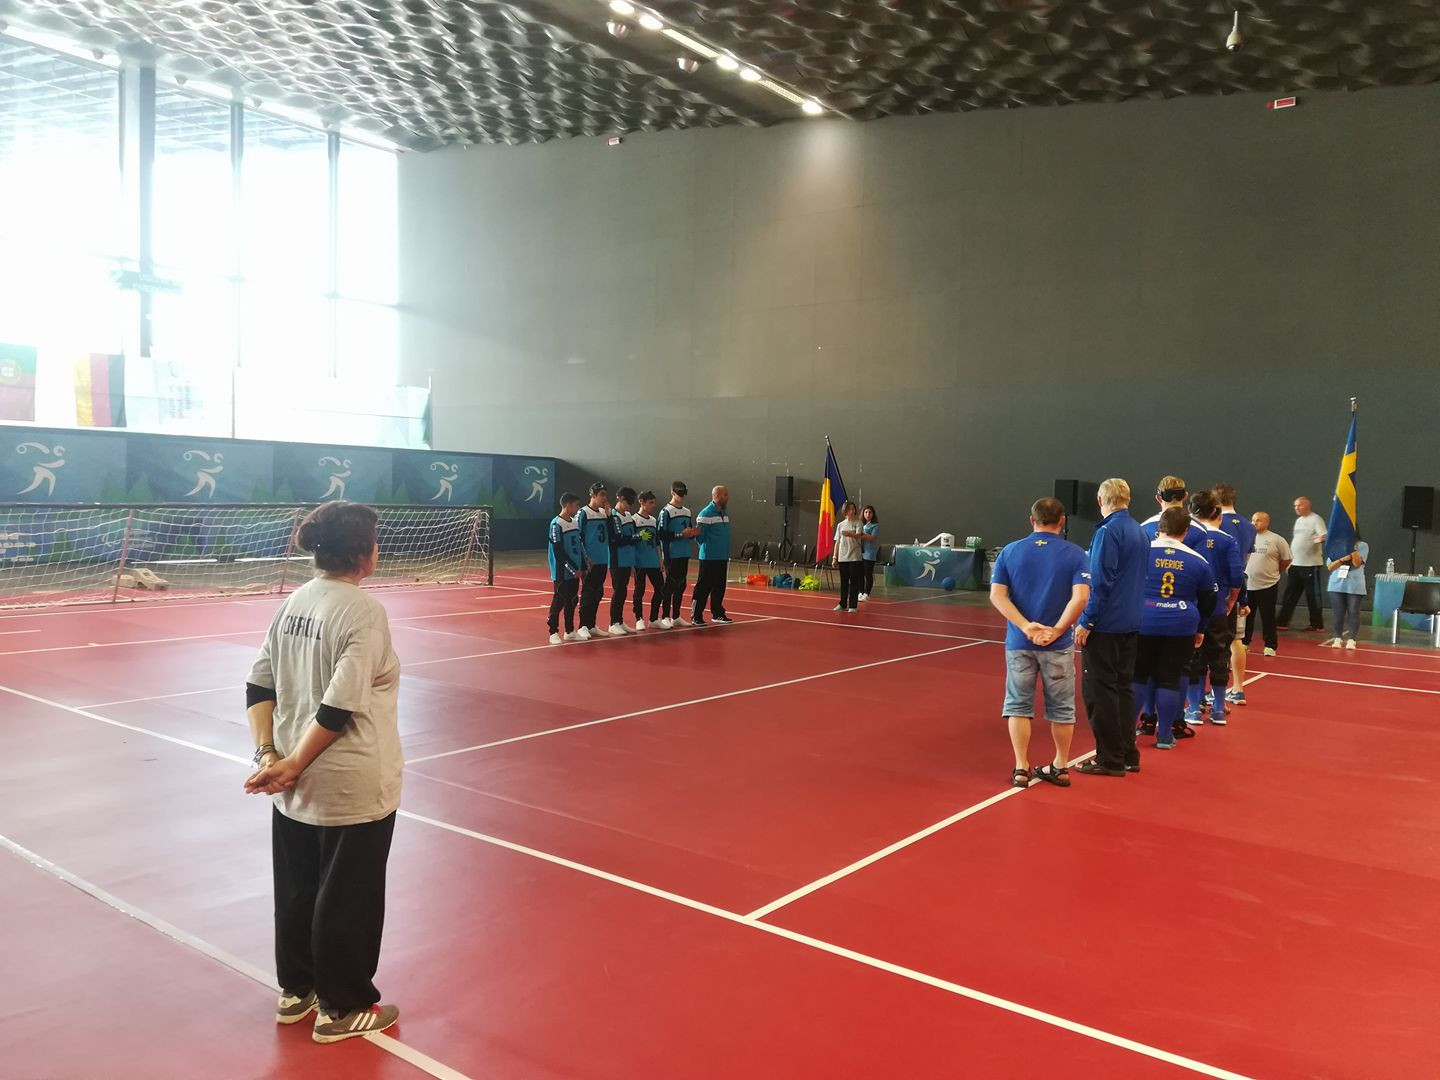 Sweden and Germany claim goalball victories at European Para Youth Games in Liguria